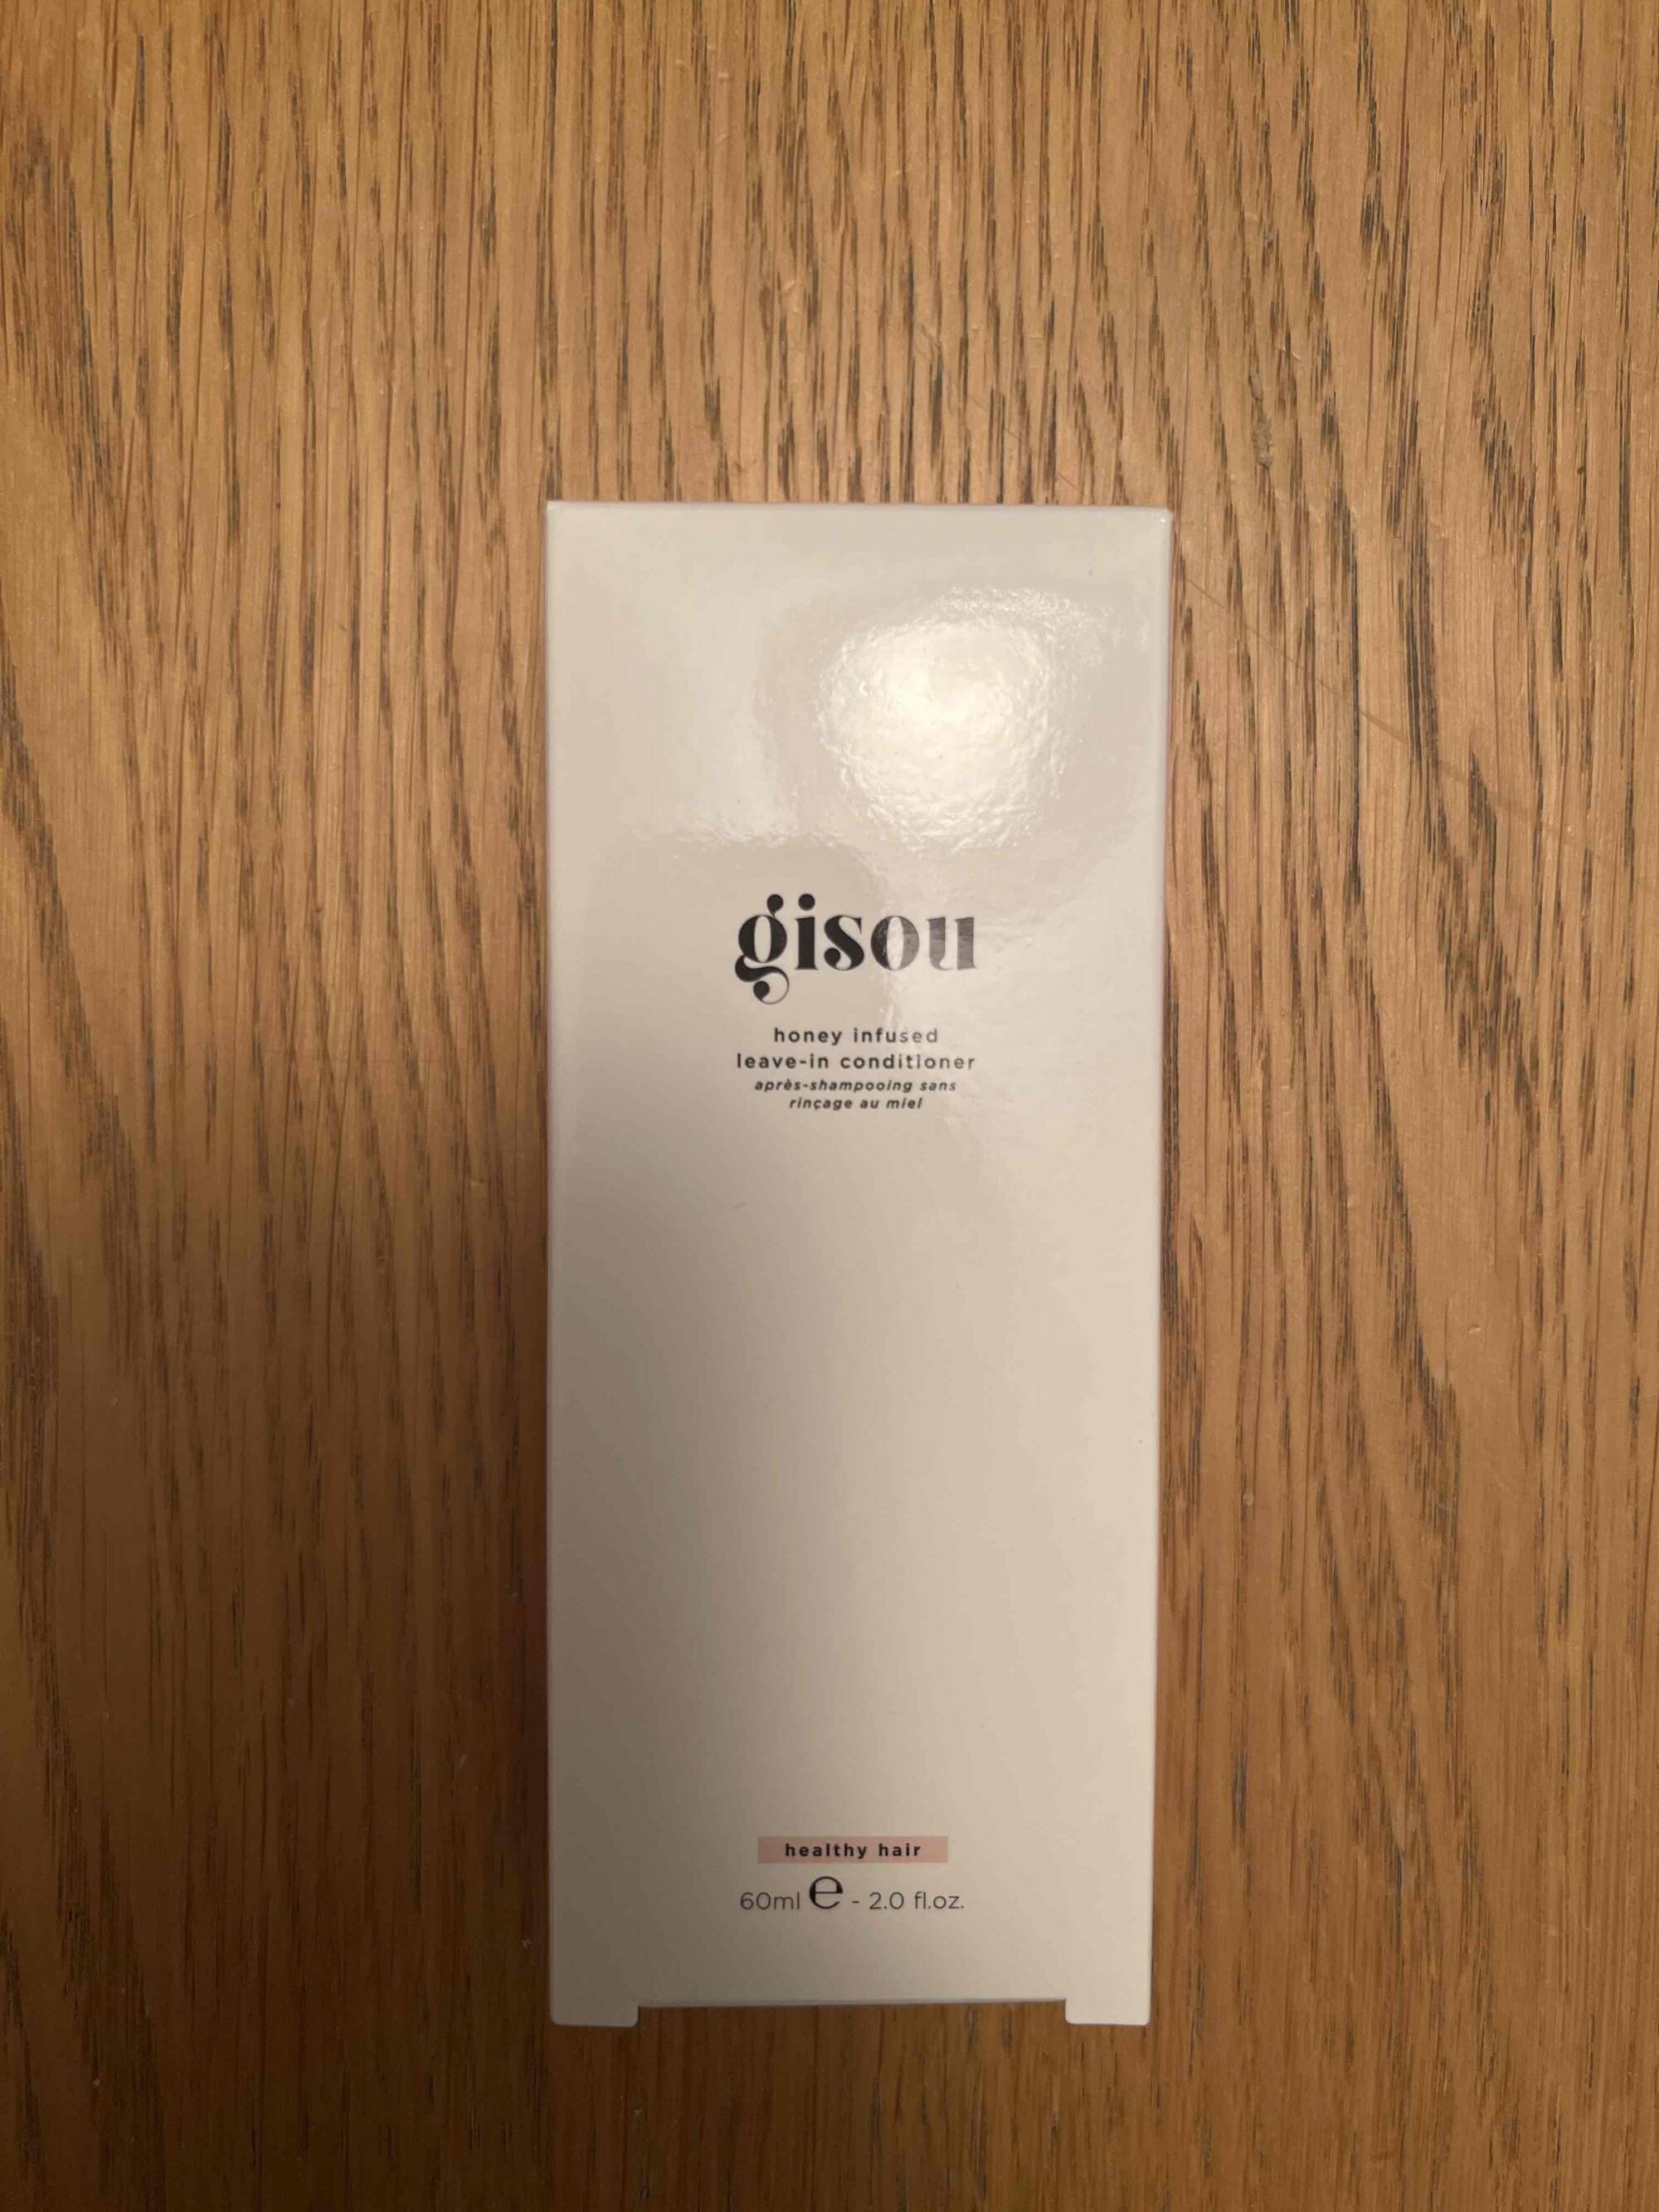 GISOU - Honey infused leave-in conditioner 